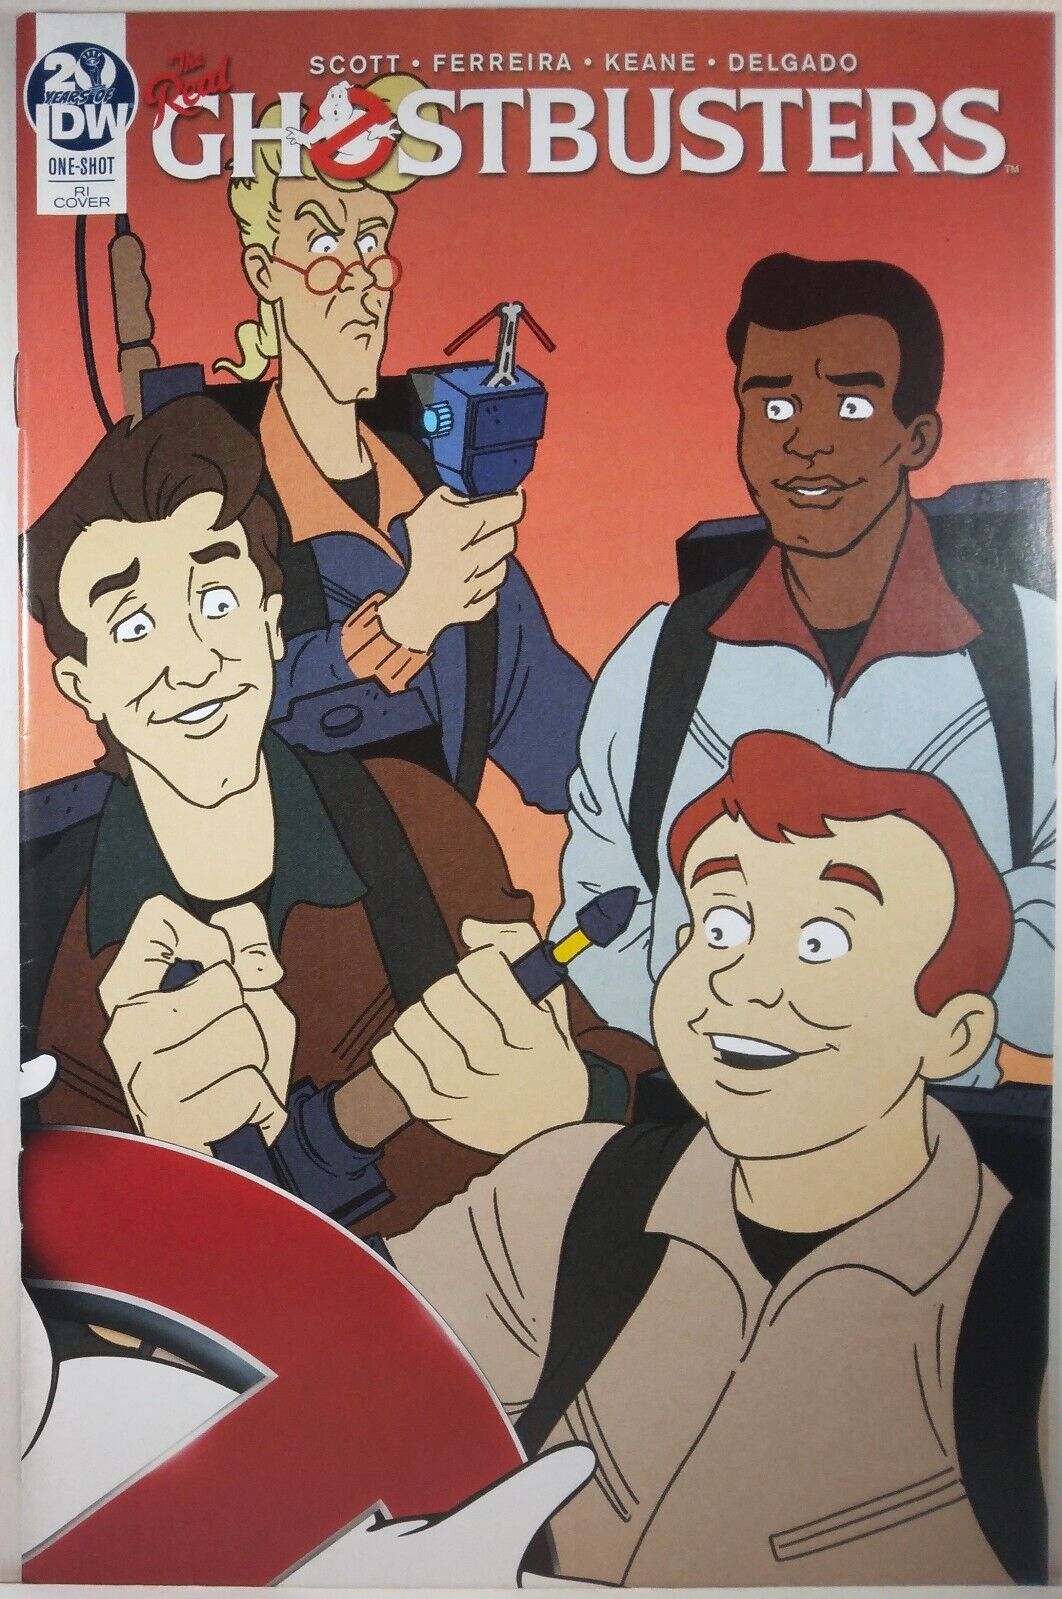 💥👻 REAL GHOSTBUSTERS 35TH ANNIVERSARY #1 RI ANTHONY MARQUES 1:10 VARIANT IDW